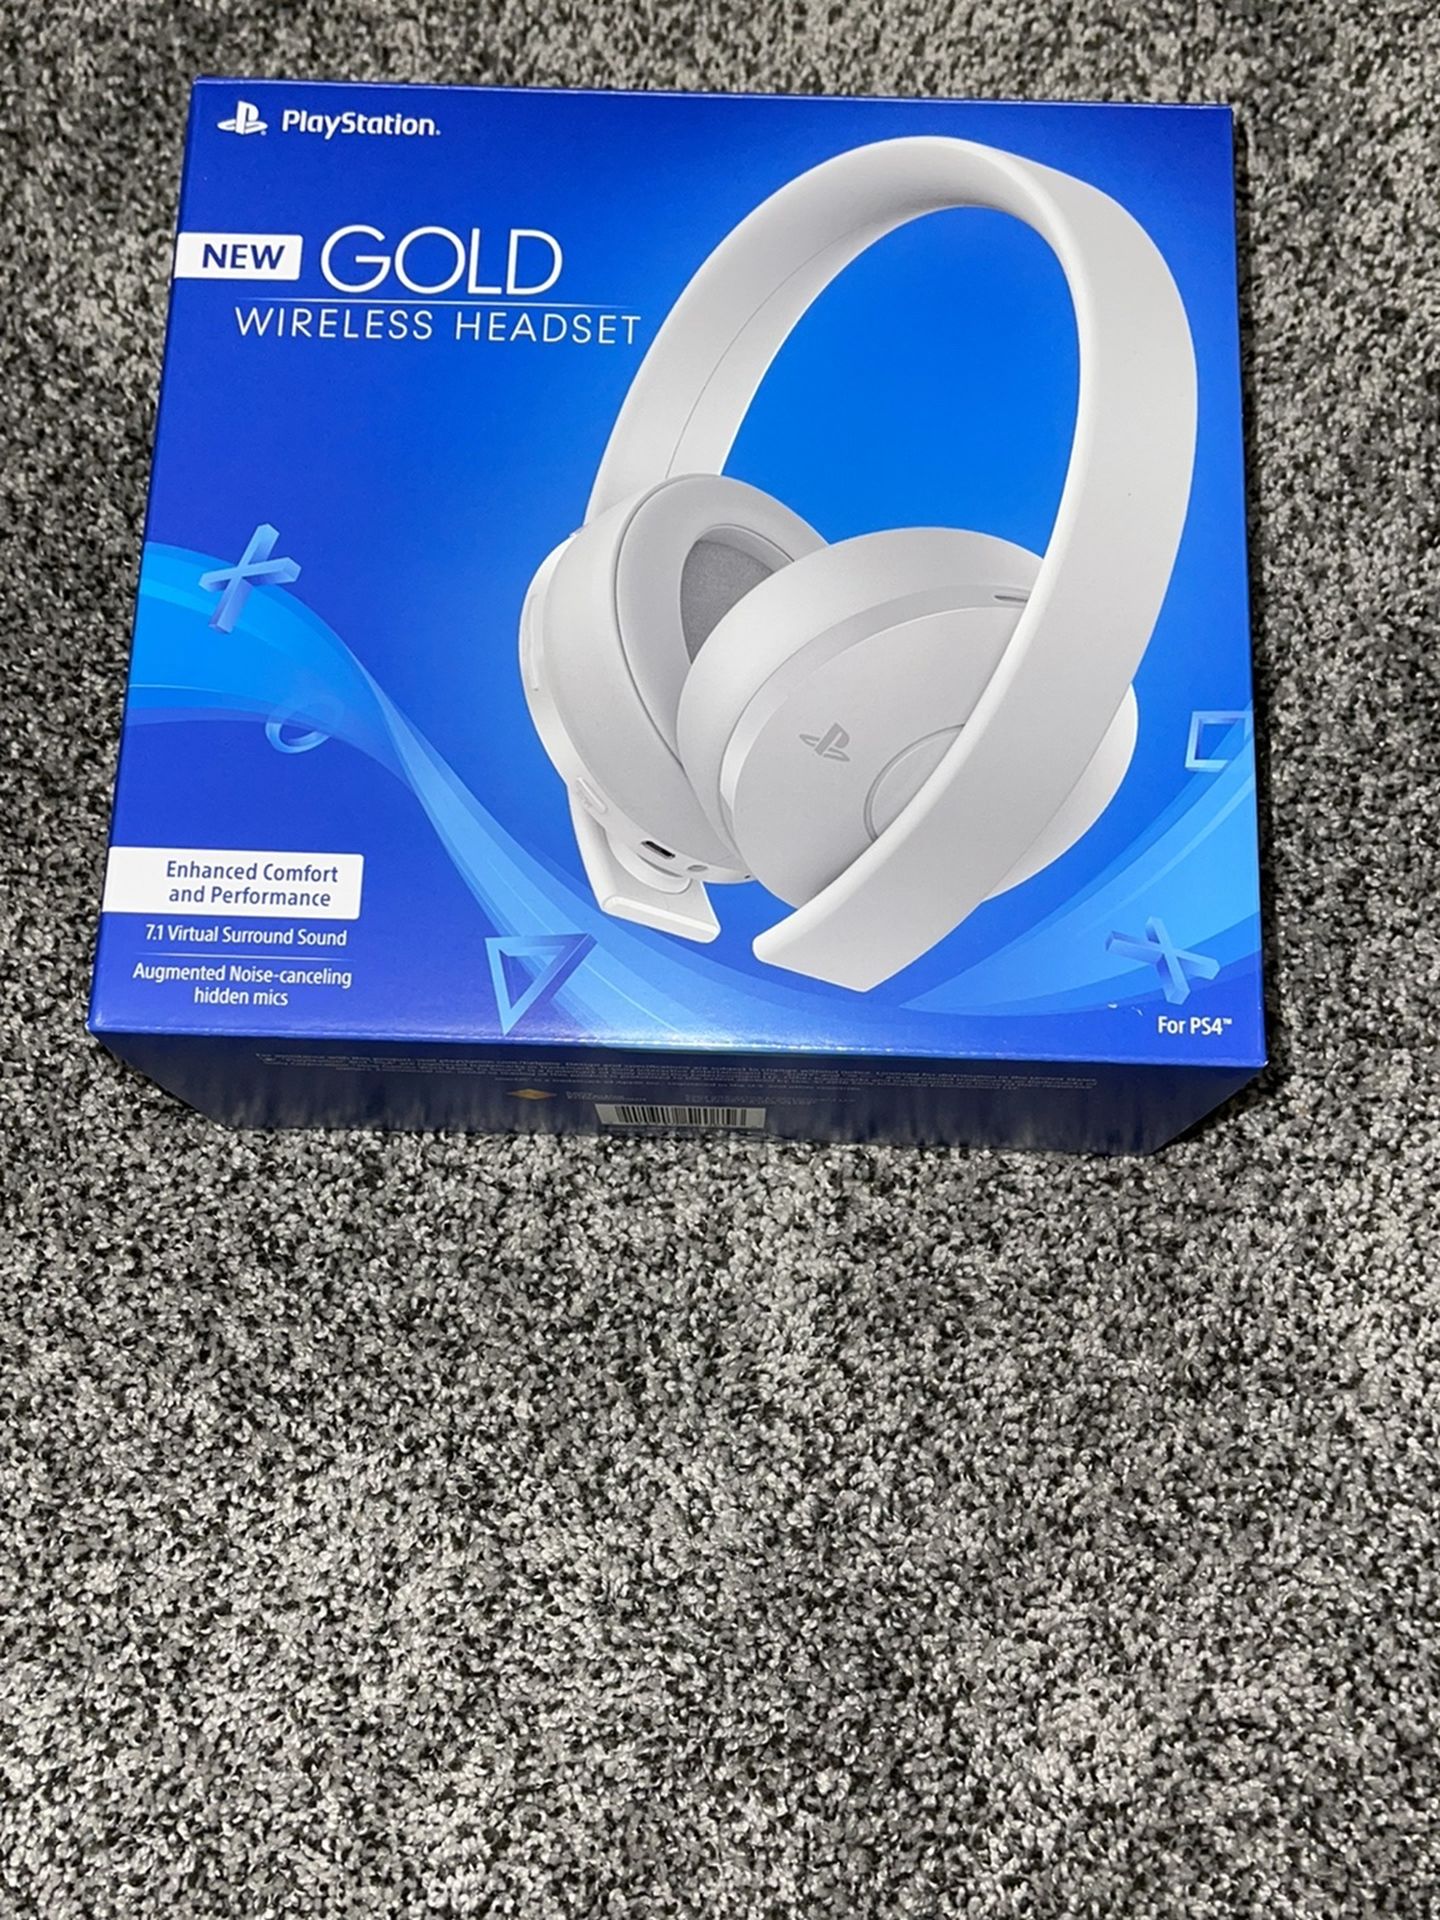 PS4 Gold Edition Wireless Headset